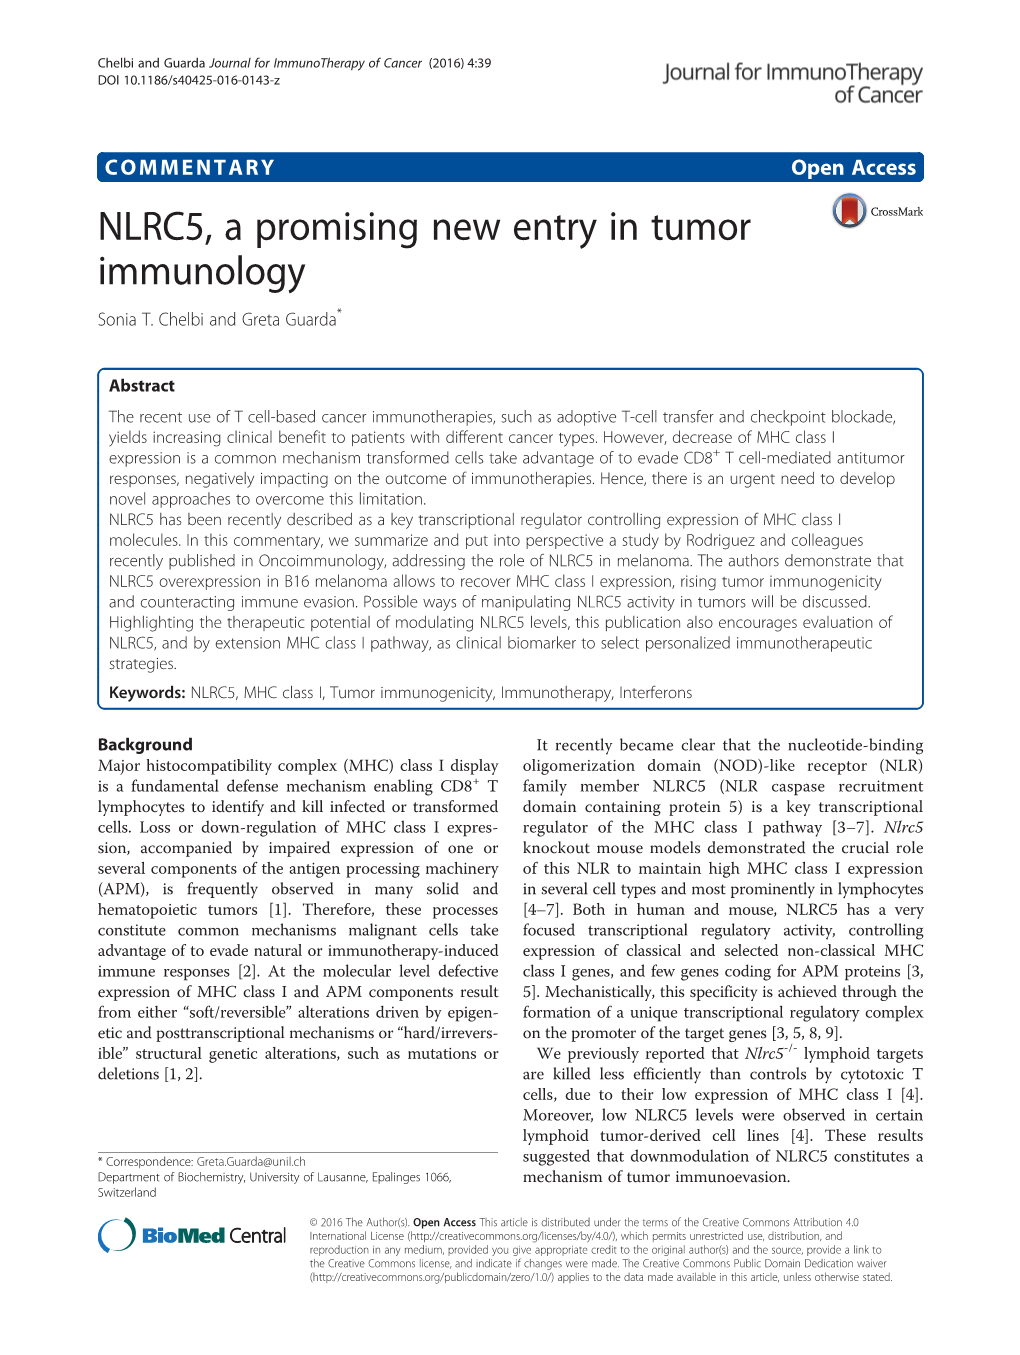 NLRC5, a Promising New Entry in Tumor Immunology Sonia T